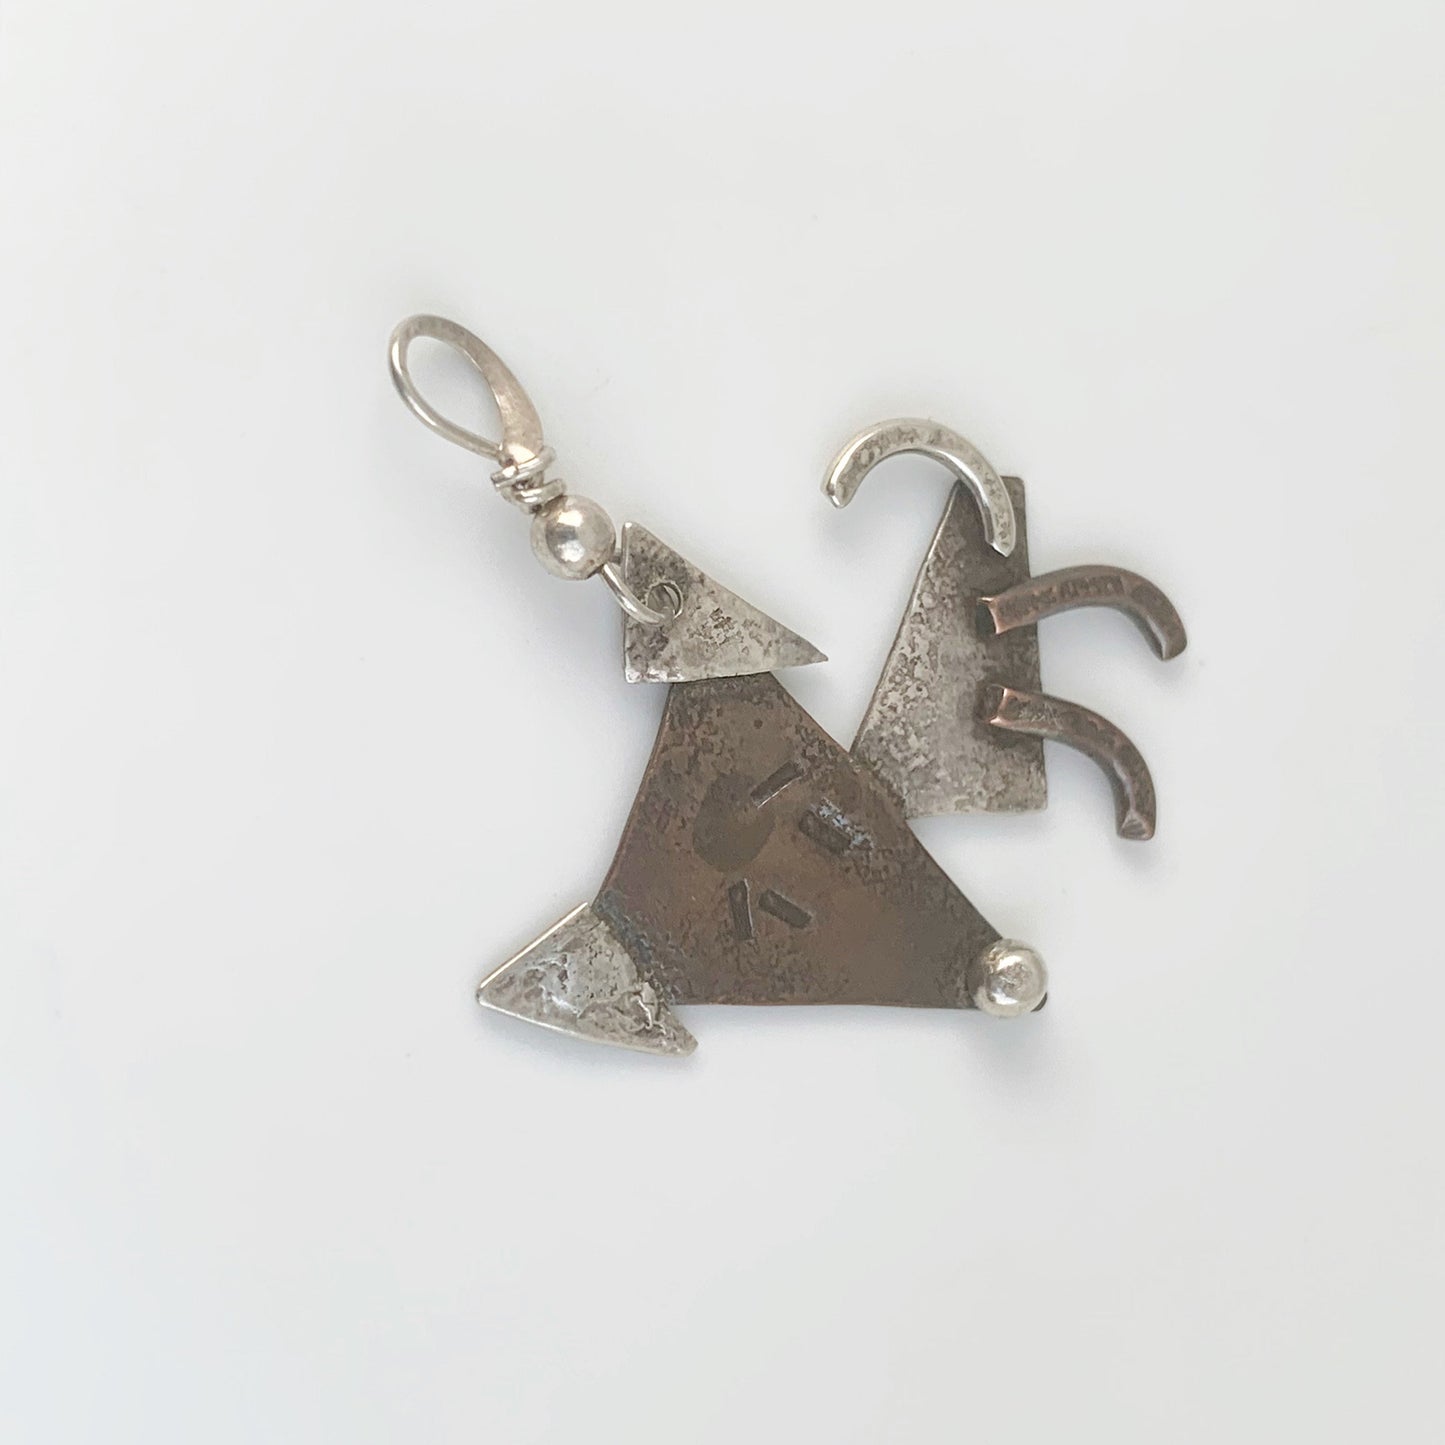 Handmade Silver and Copper Dog Charm | Whimsical Dog Charm Pendant | Mixed Metal Charm